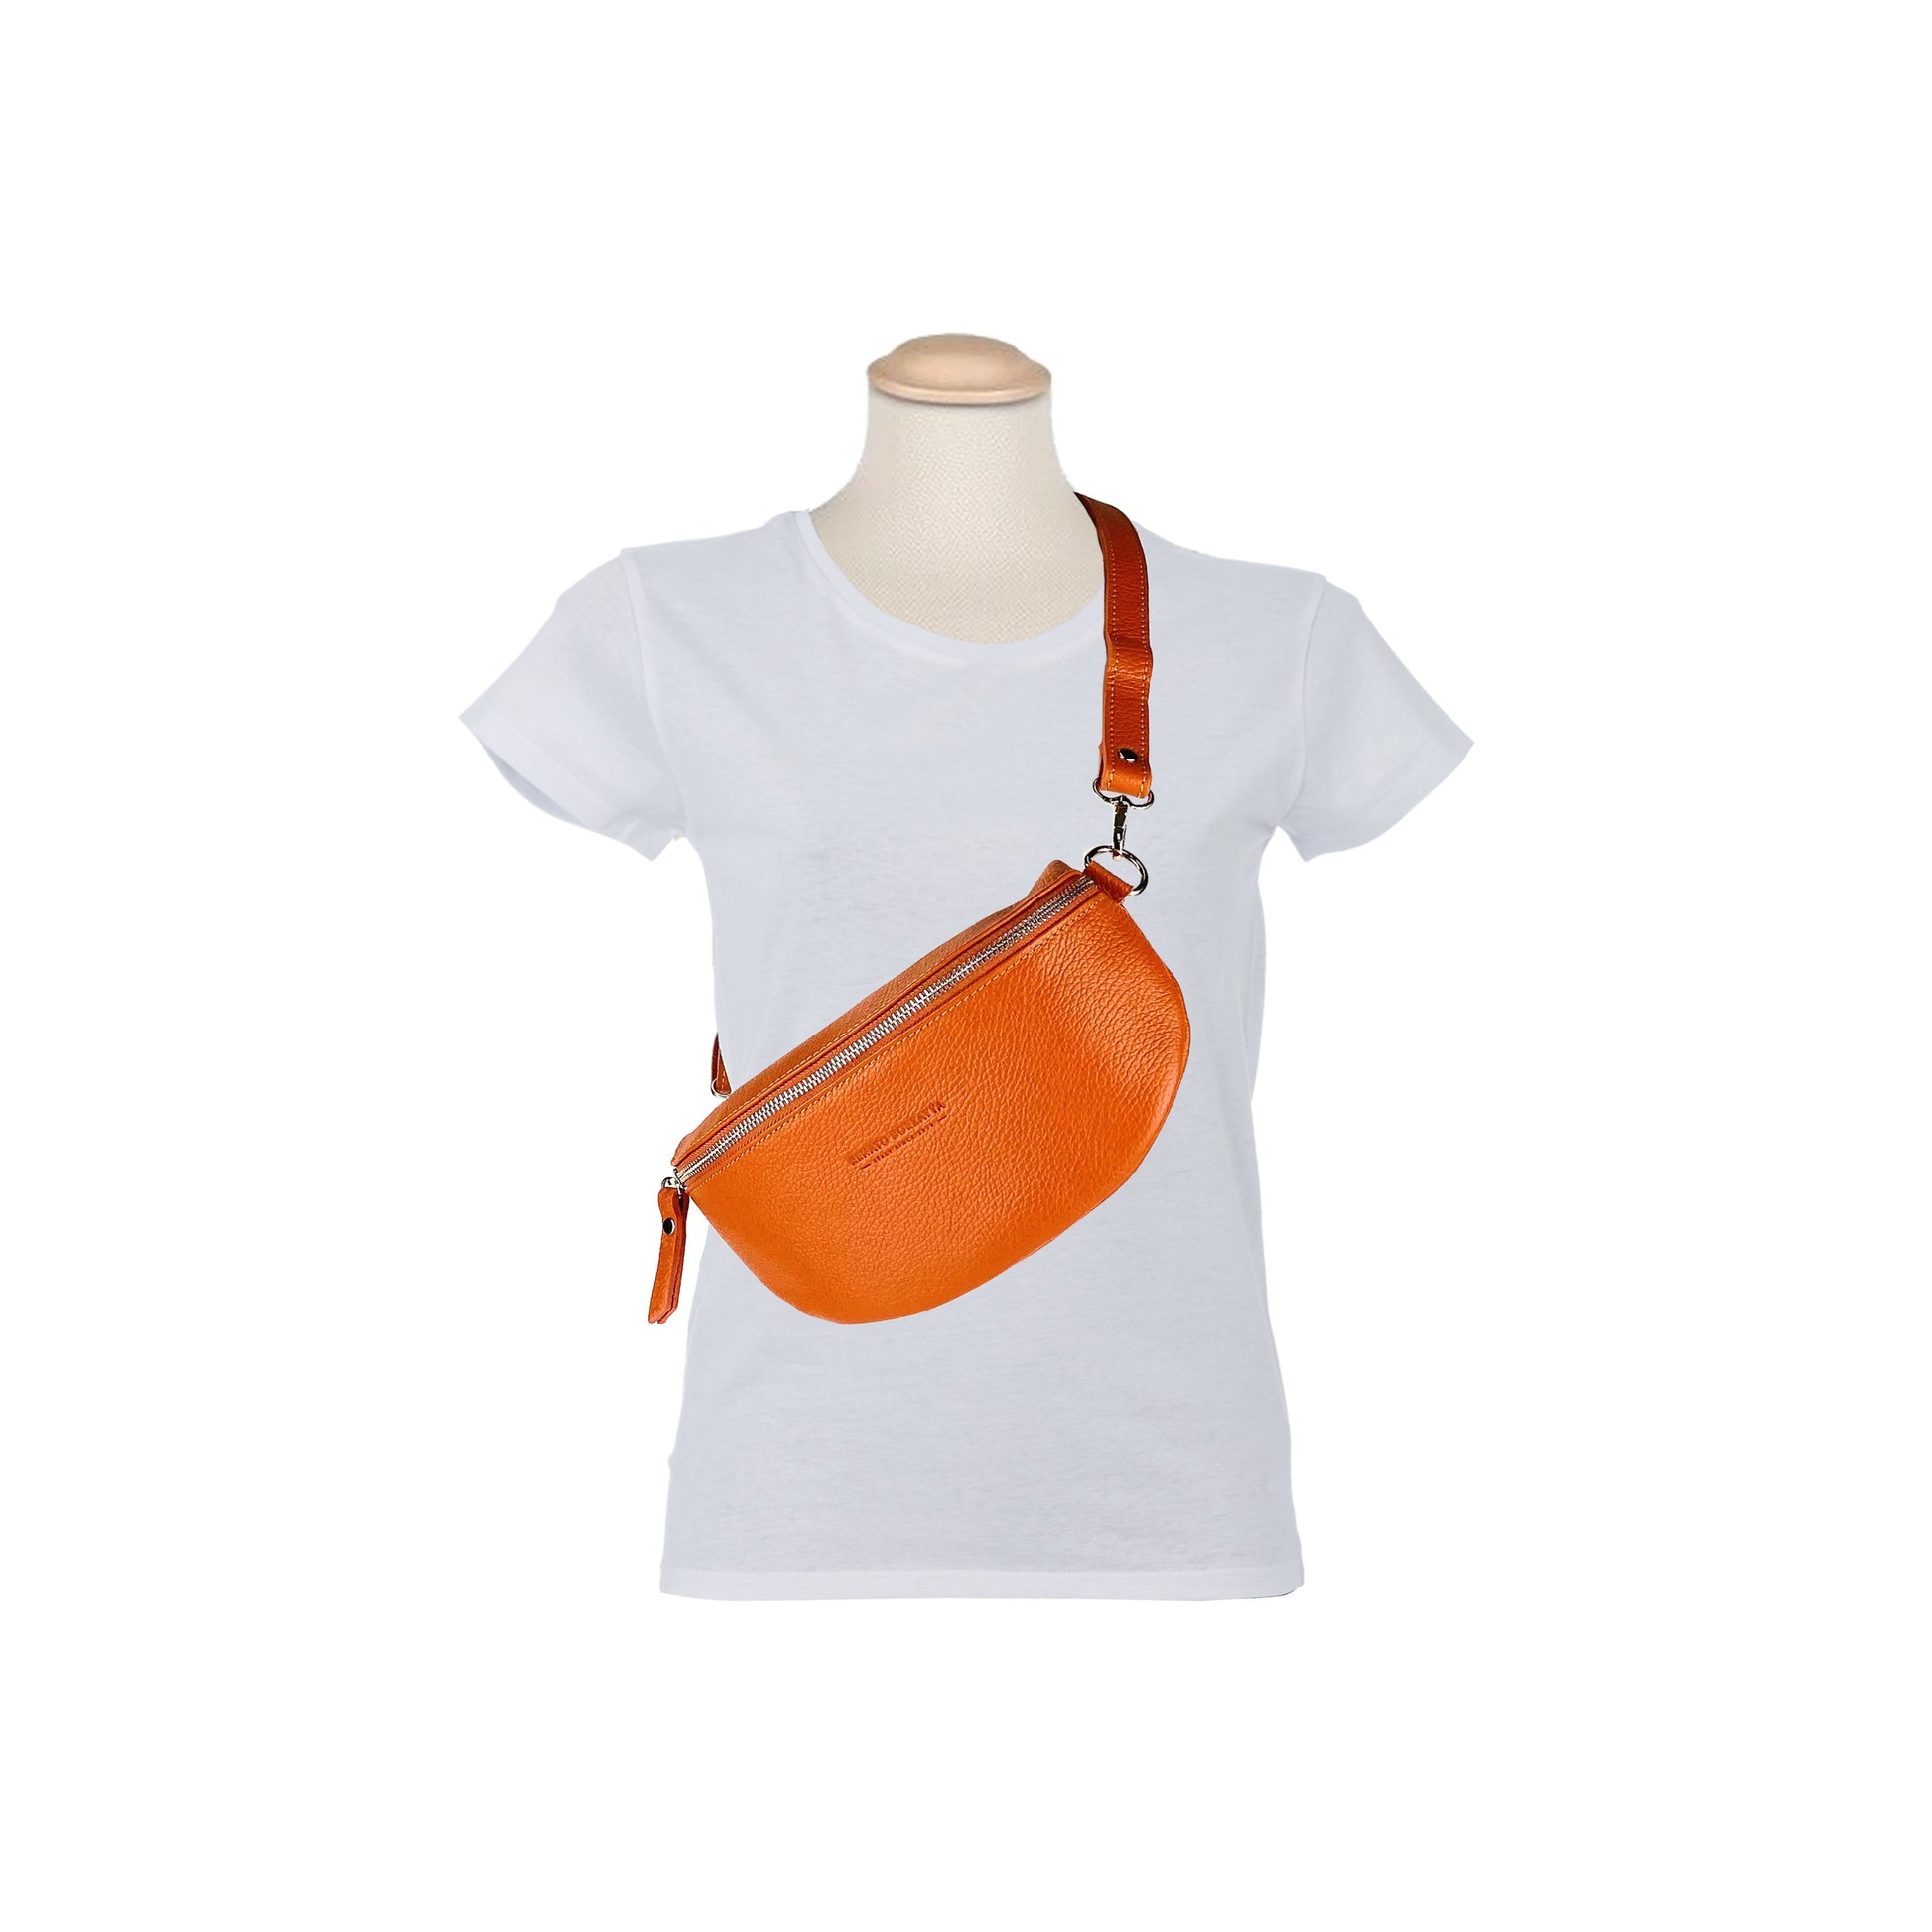 RB1015L | Waist bag with removable shoulder strap in Genuine Leather Made in Italy. Attachments with shiny nickel metal snap hooks - Orange color - Dimensions: 24 x 14 x 7-6